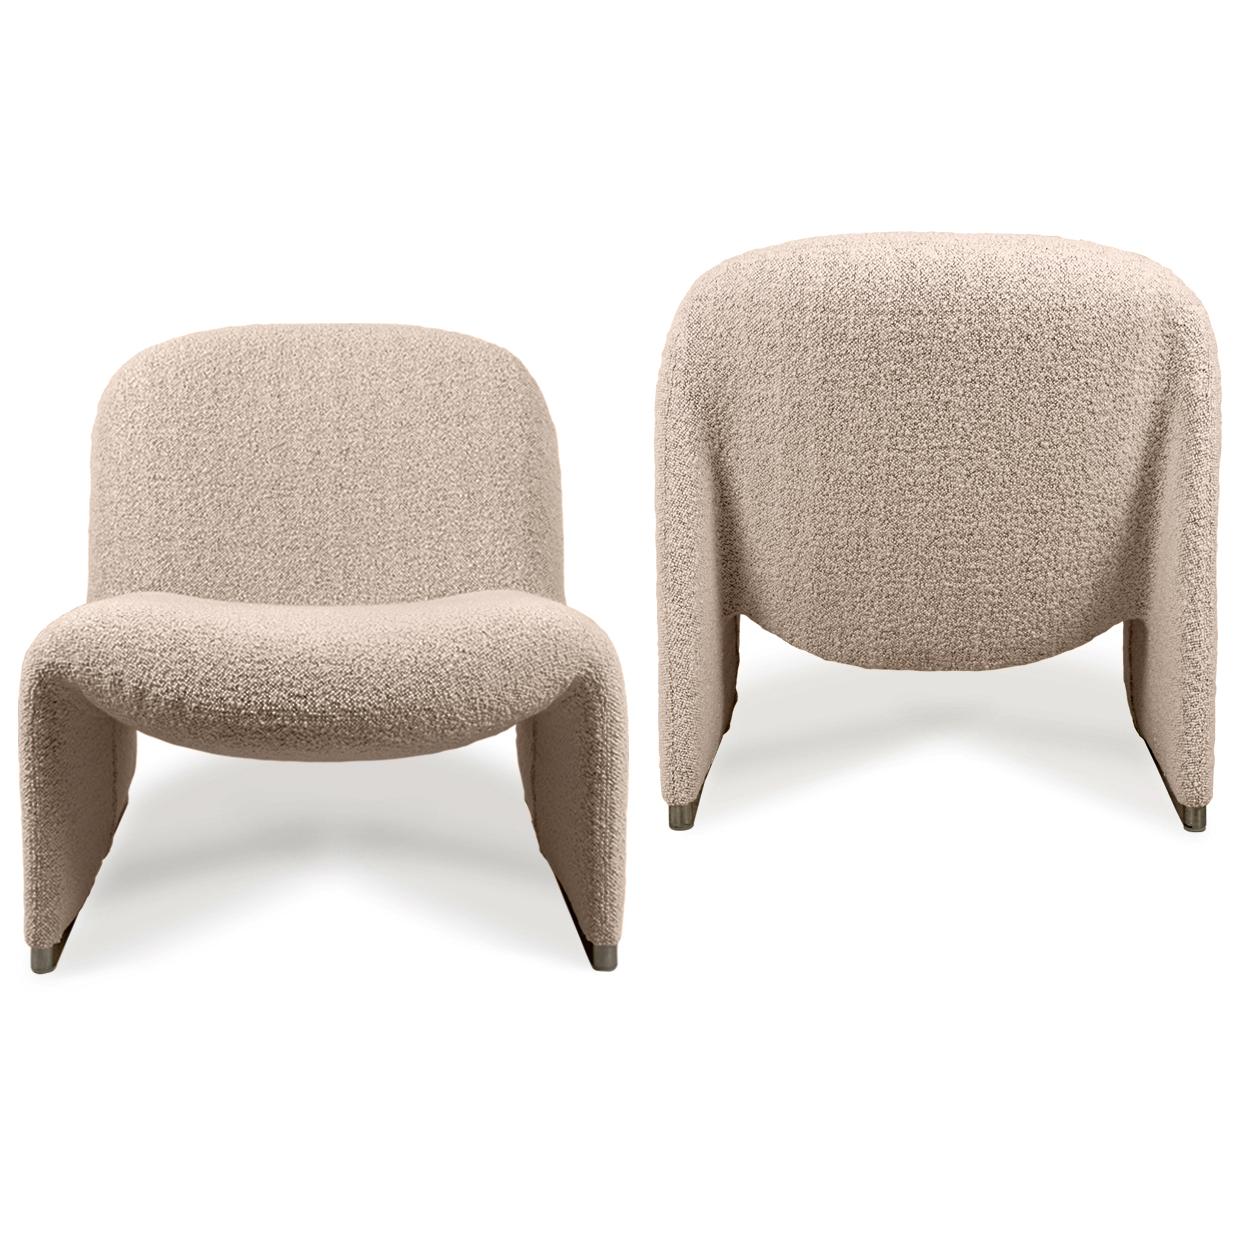 Mid-Century Modern One 'Alky' Chair by G. Piretti for Castelli New Upholstery Boucle by Dedar